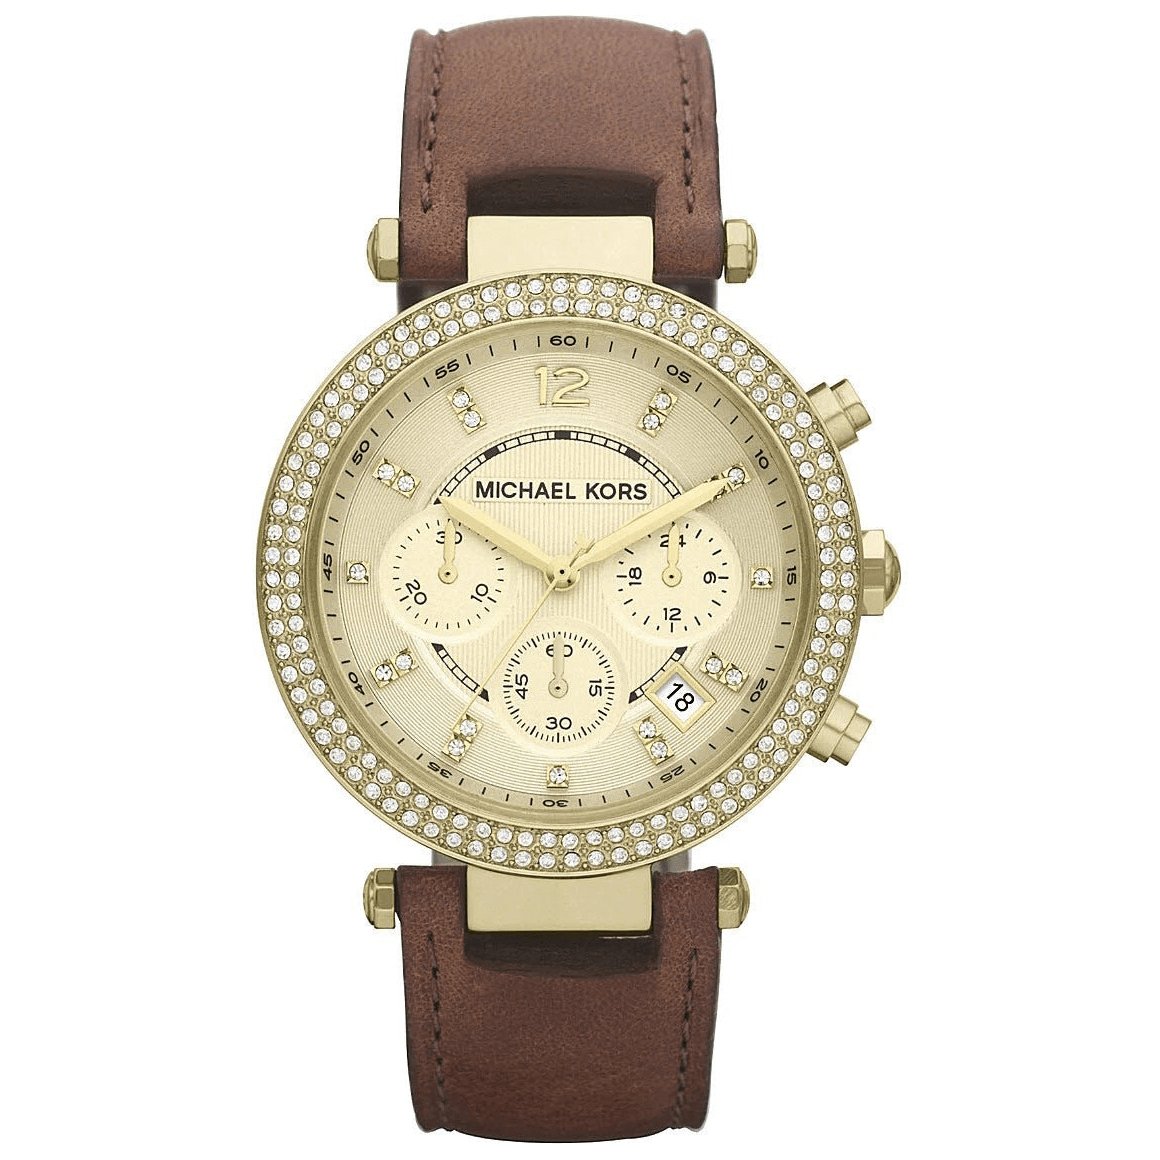 Michael Kors Ladies Watch Parker Brown Leather MK2249 – Watches & Crystals